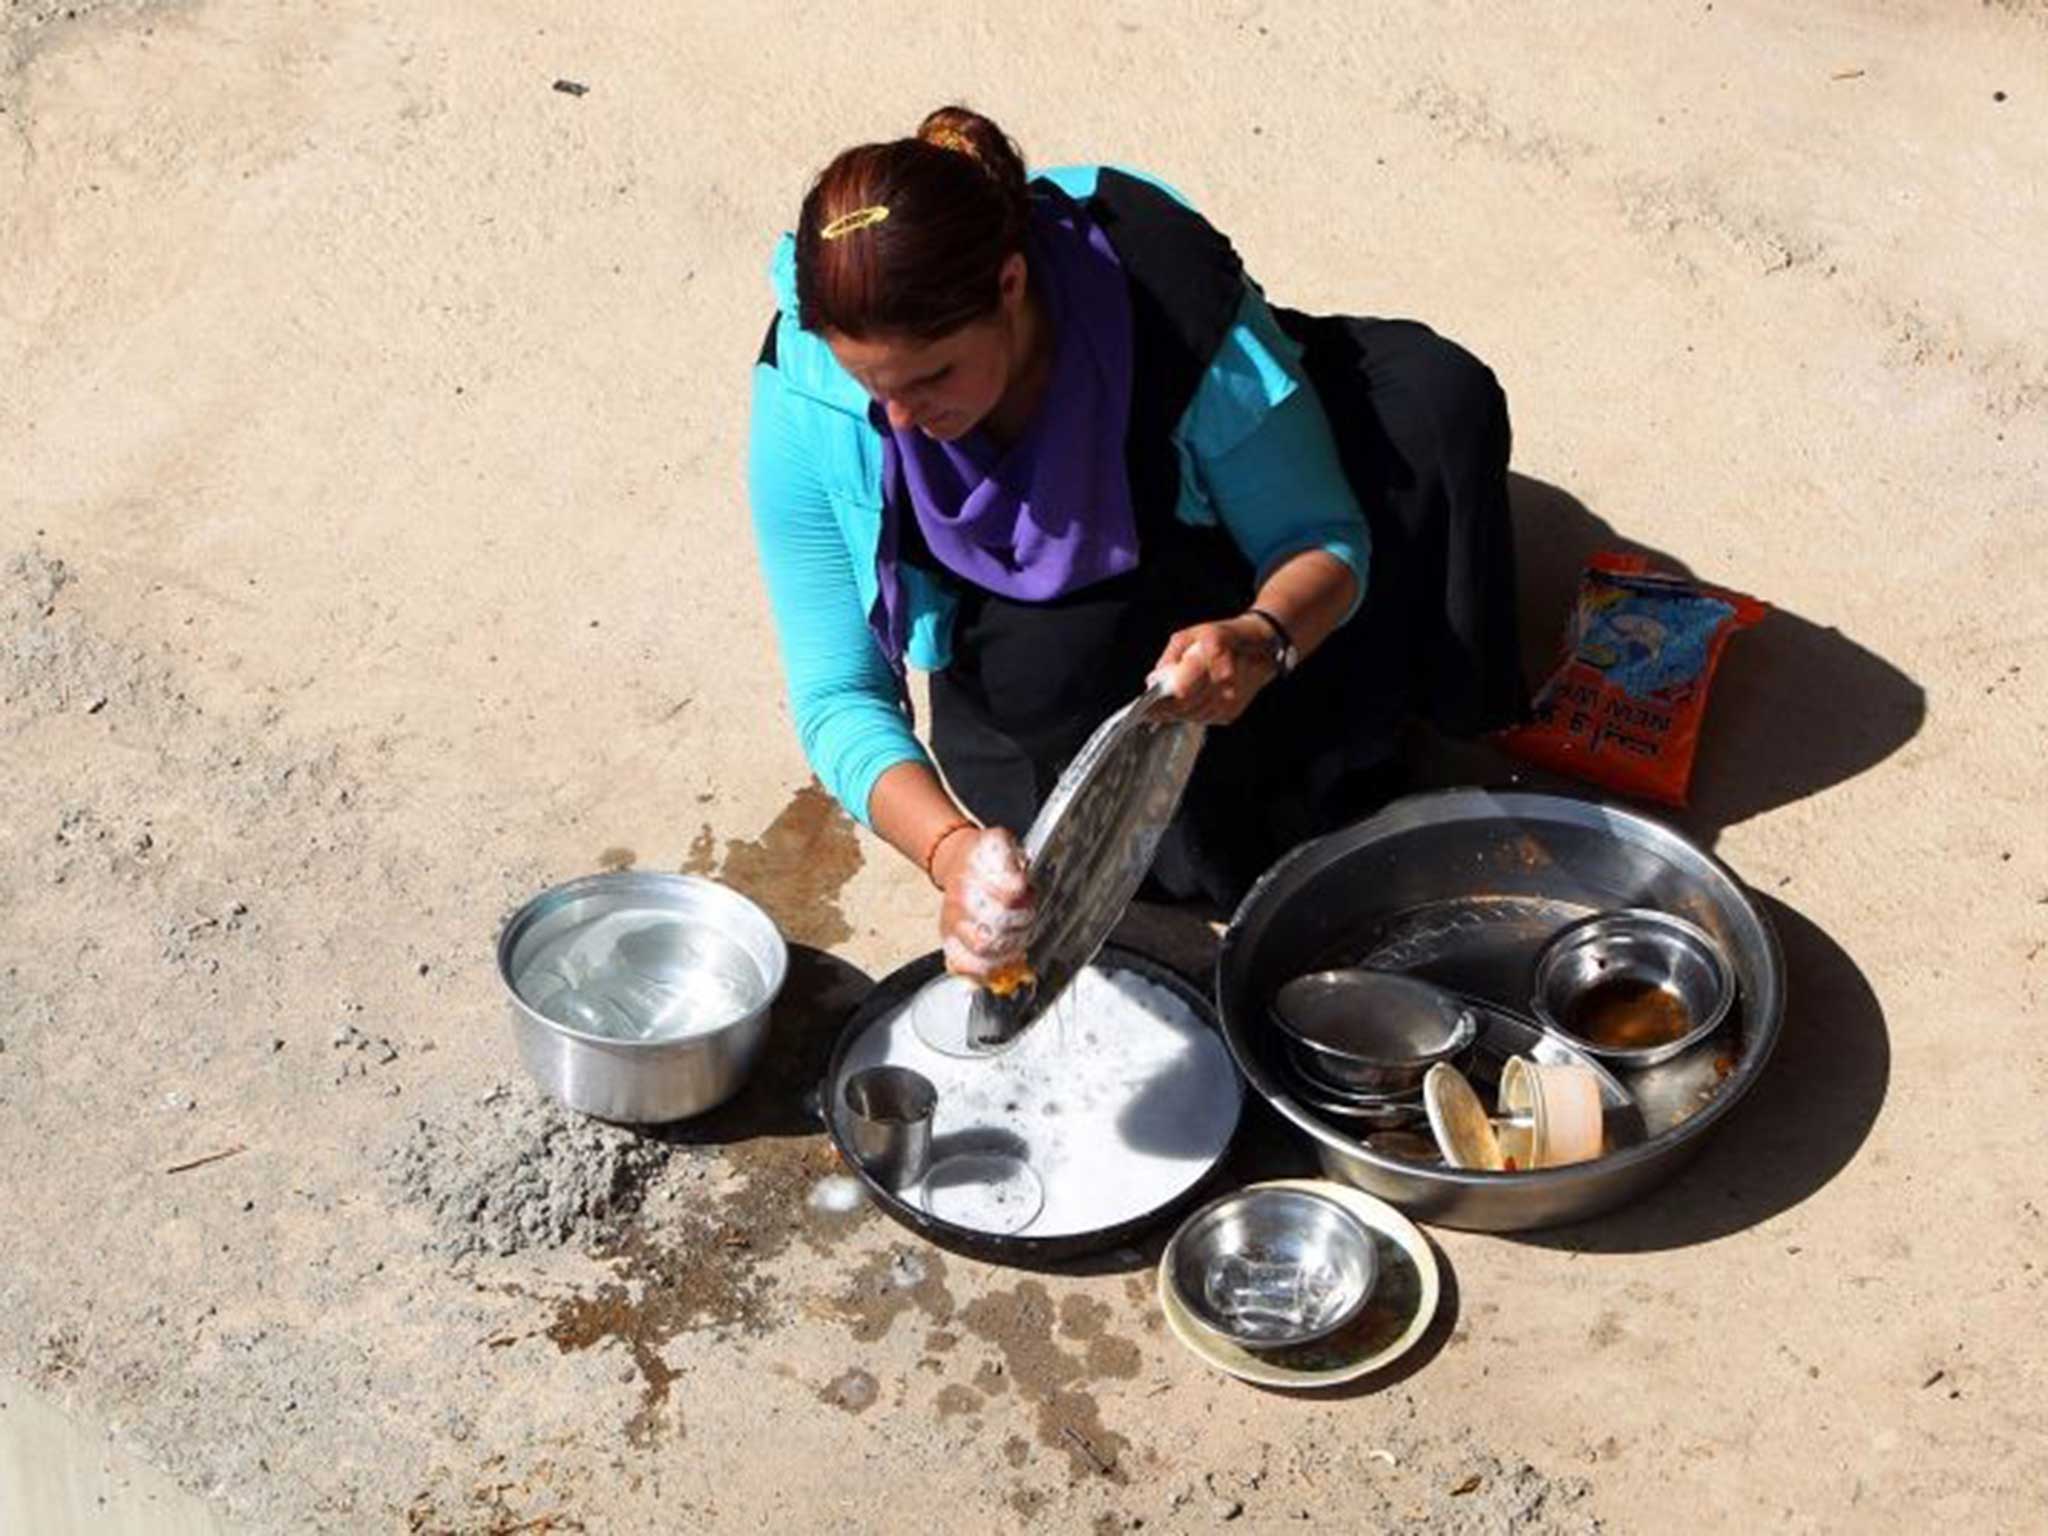 An Iraqi Yazidi woman, who fled her home when Islamic State militants attacked the town of Sinjar, cleans dishes